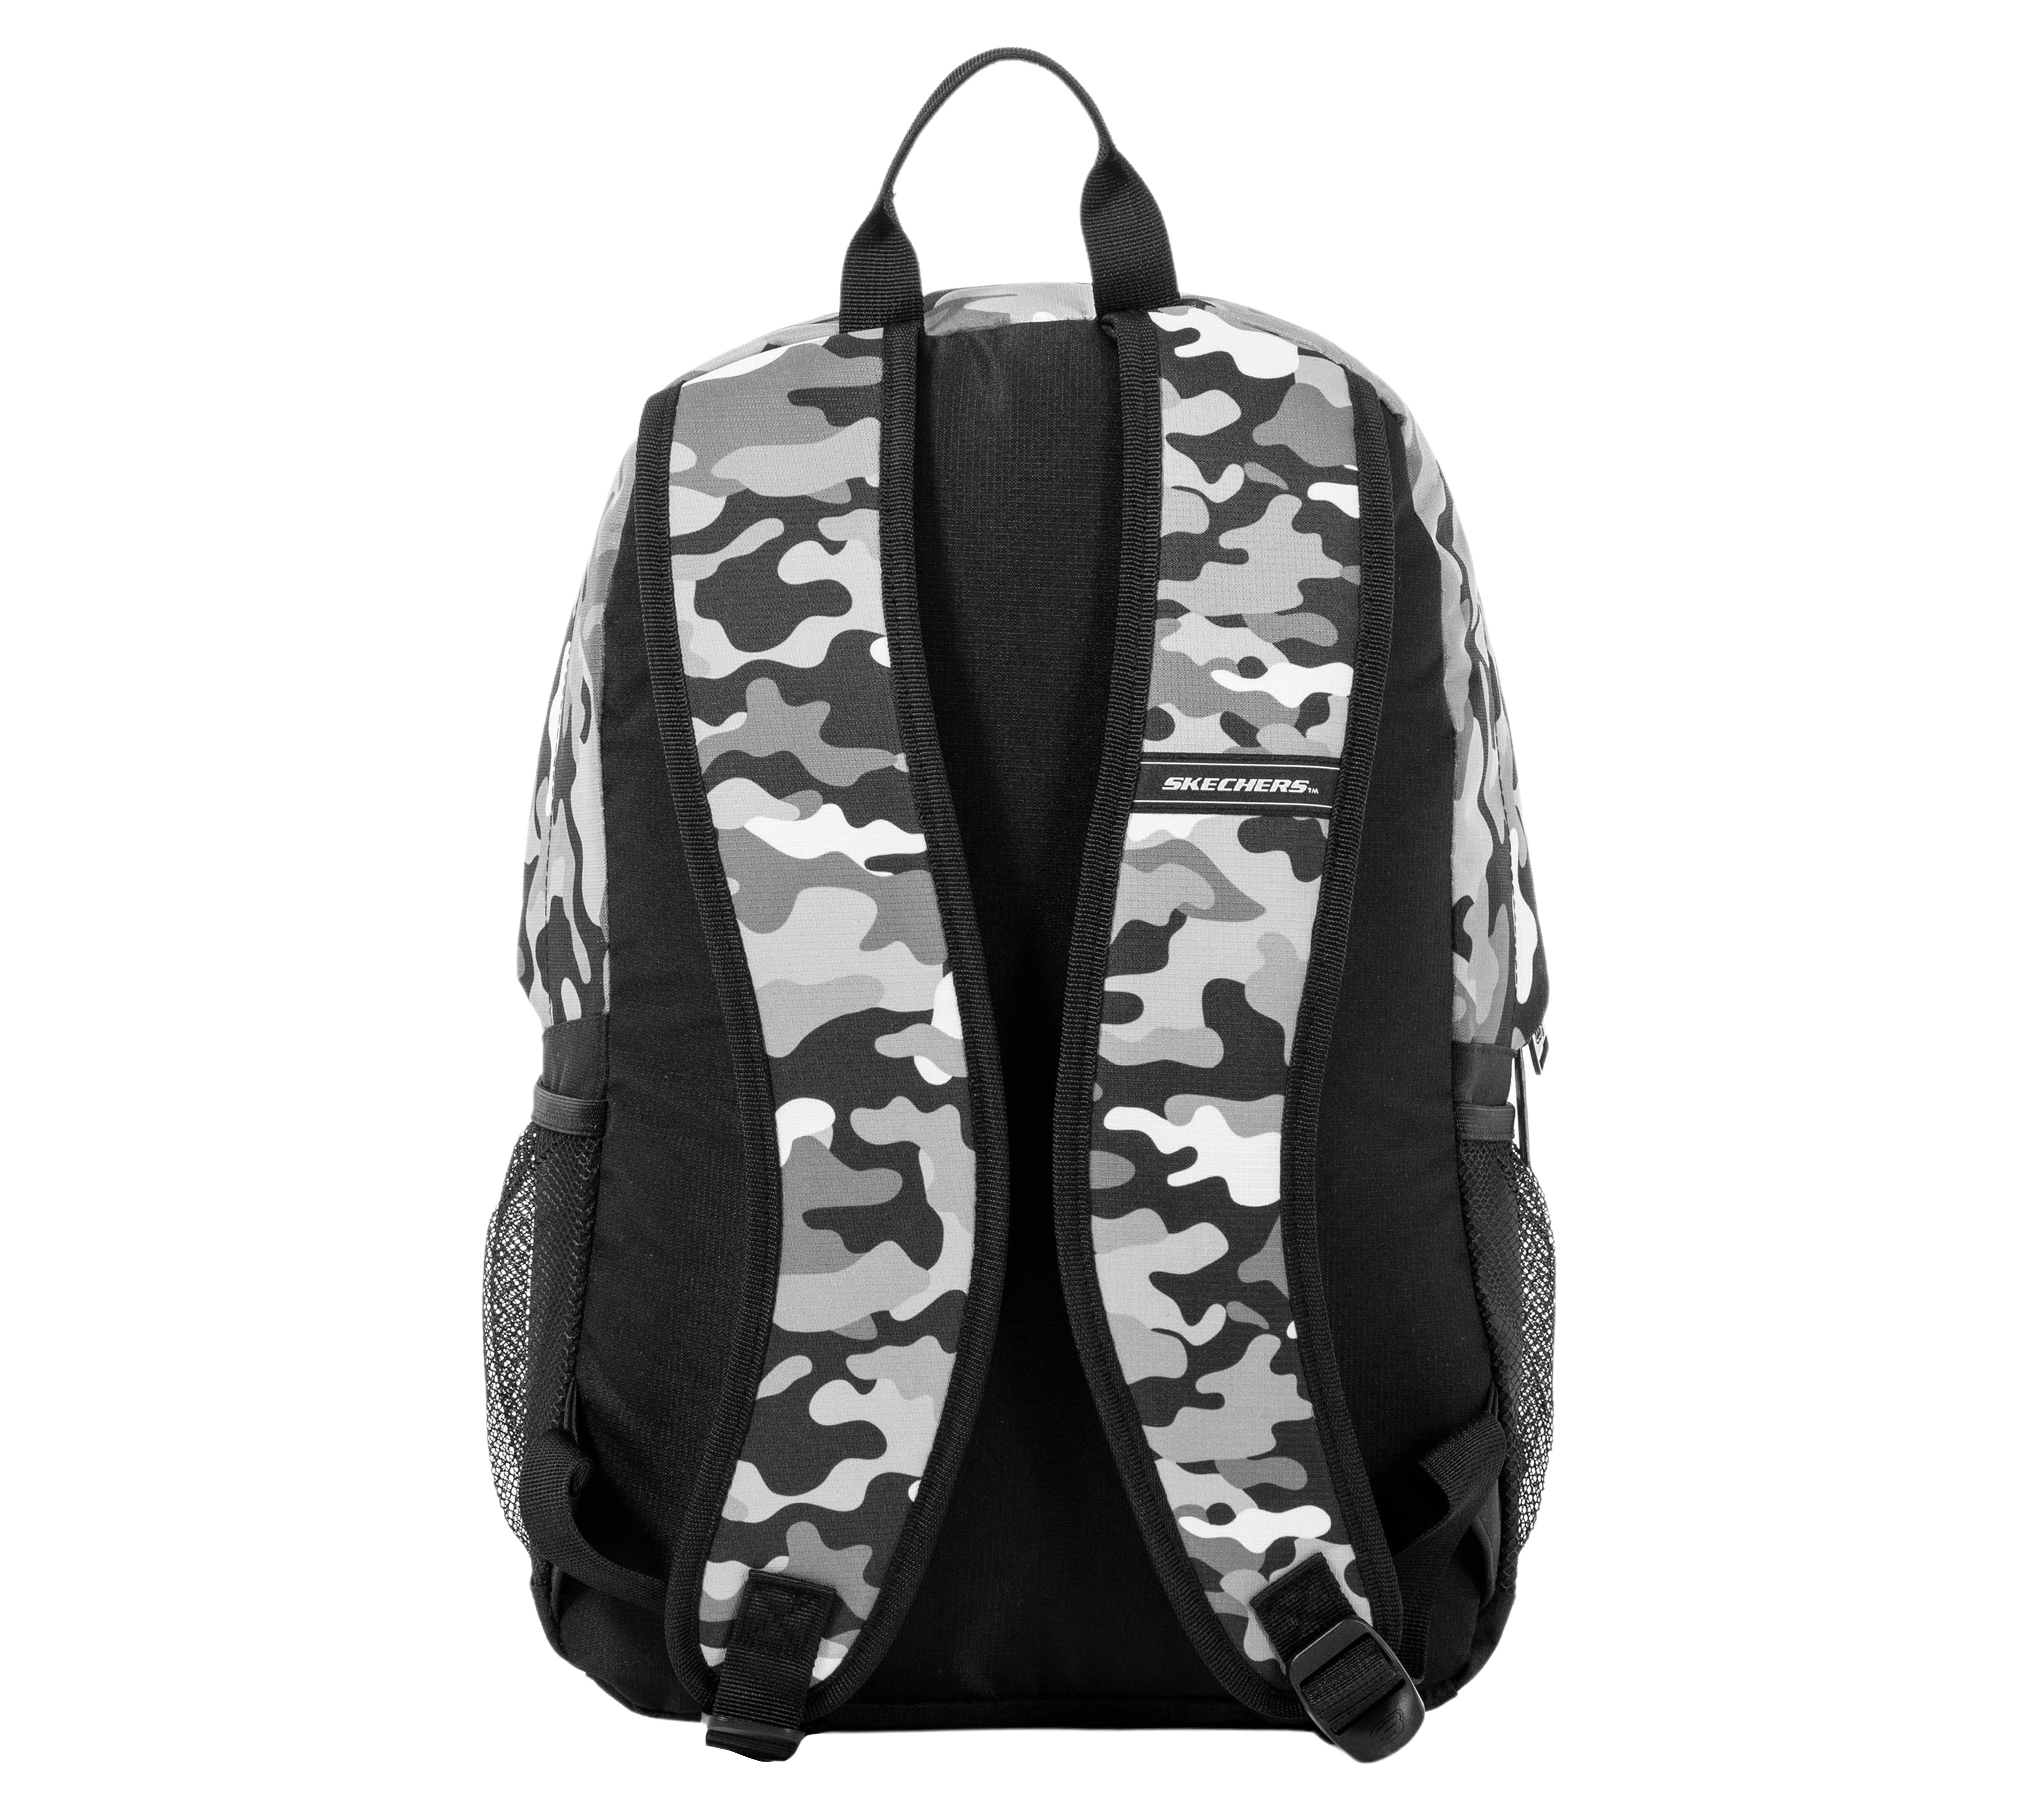 Luxe Black Camo Backpack